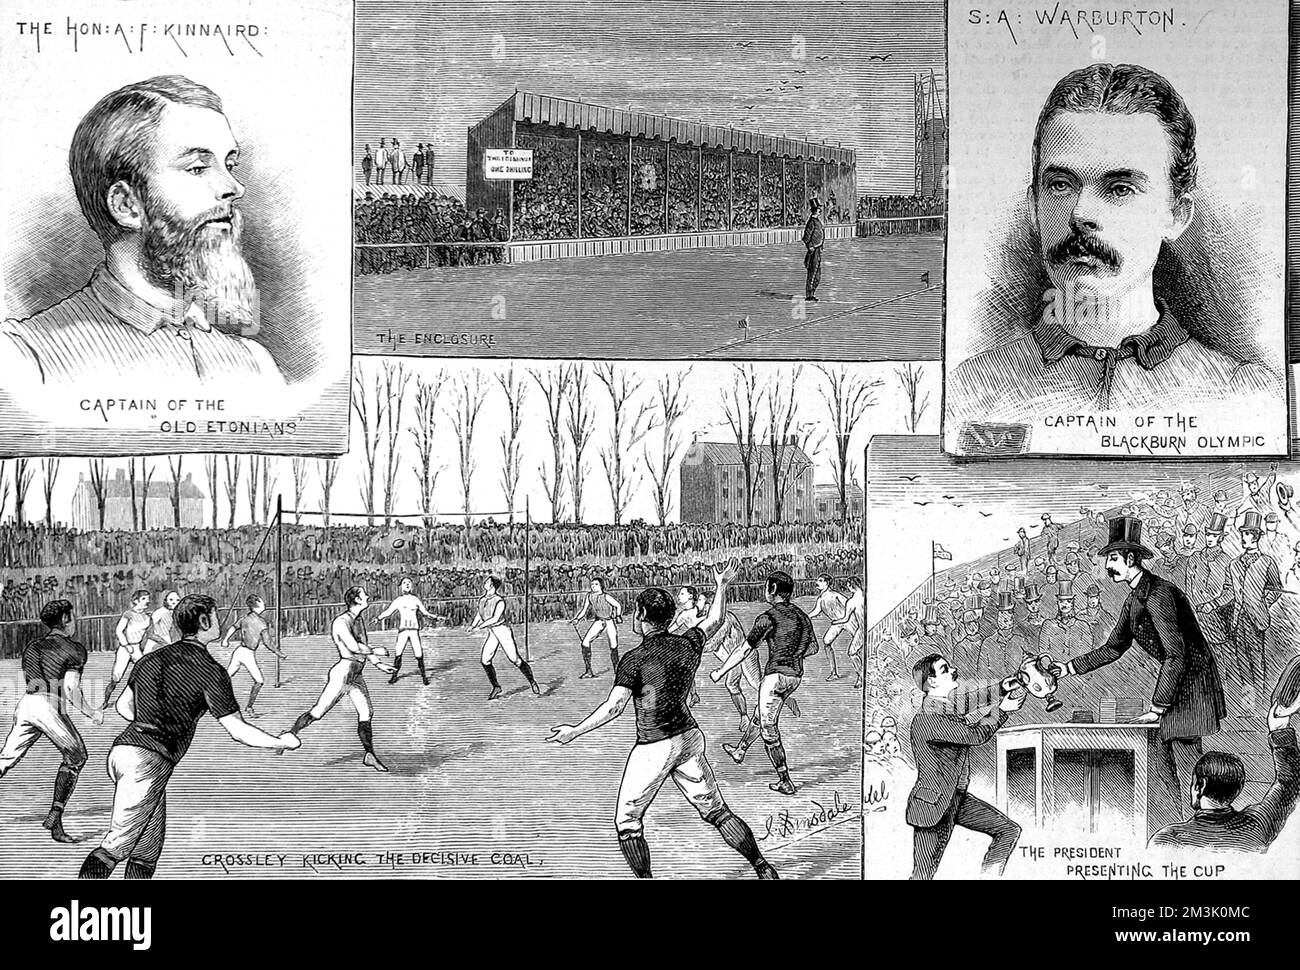 A number of scenes from the F.A. Cup Final of 1883, played between Blackburn Olympic and the Old Etonians at Kennington Oval, London. The match was won by Blackburn 2-1.  The images show: (top left) A.F. Kinnaird, Captain of the Old Etonians; (top middle) The Main stand; (top right) S.A. Warburton, Captain of Blackburn Olympic; (bottom left) Crossley of Blackburn scoring the decisive goal; (bottom right) the F.A. President presents the Cup to Warburton.  1883 Stock Photo